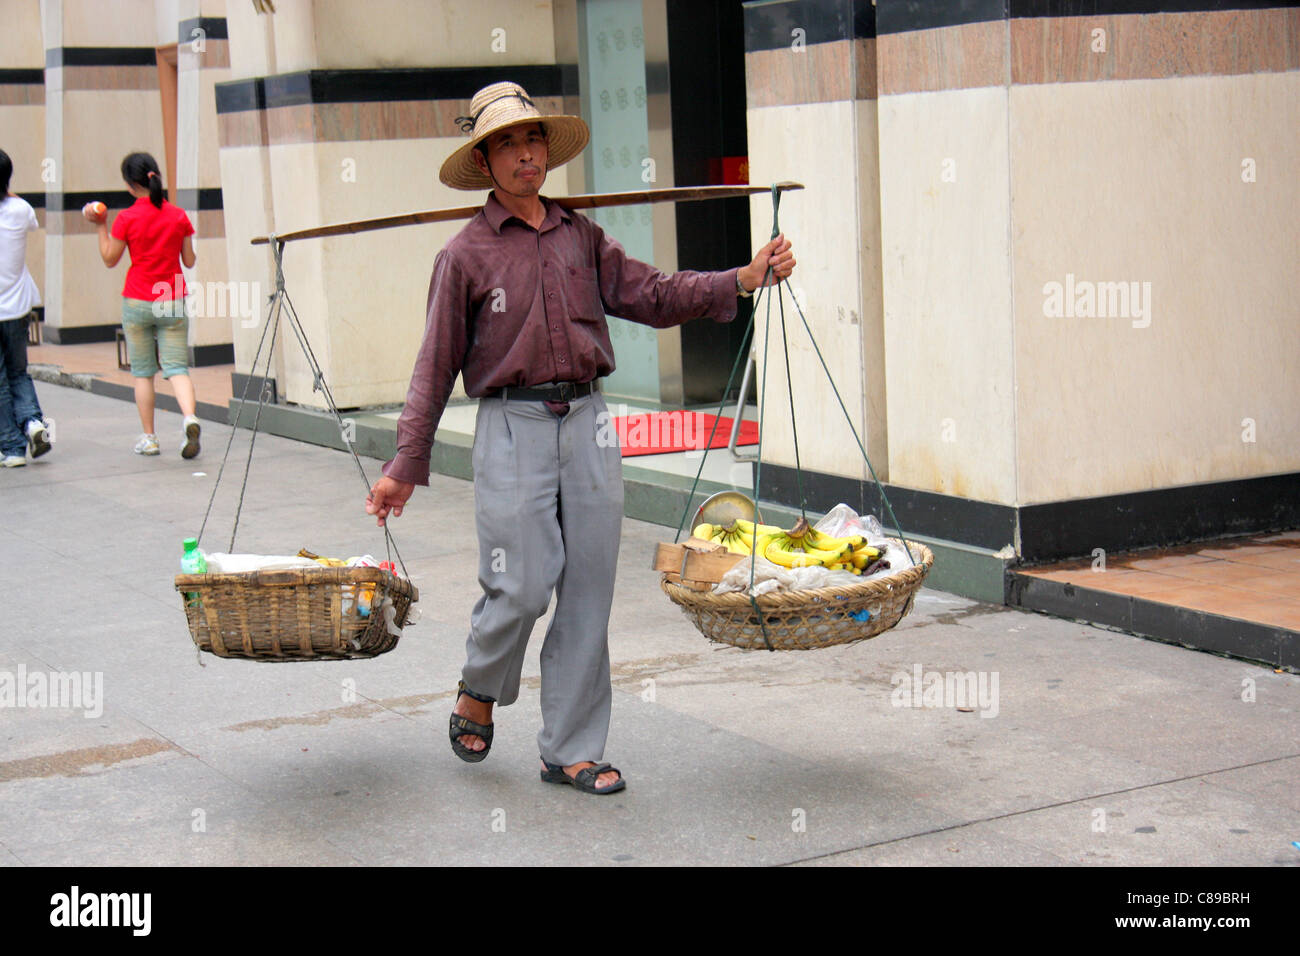 Man using a carrying pole across his shoulders to transport baskets of bananas and other goods, Wuhan, China Stock Photo